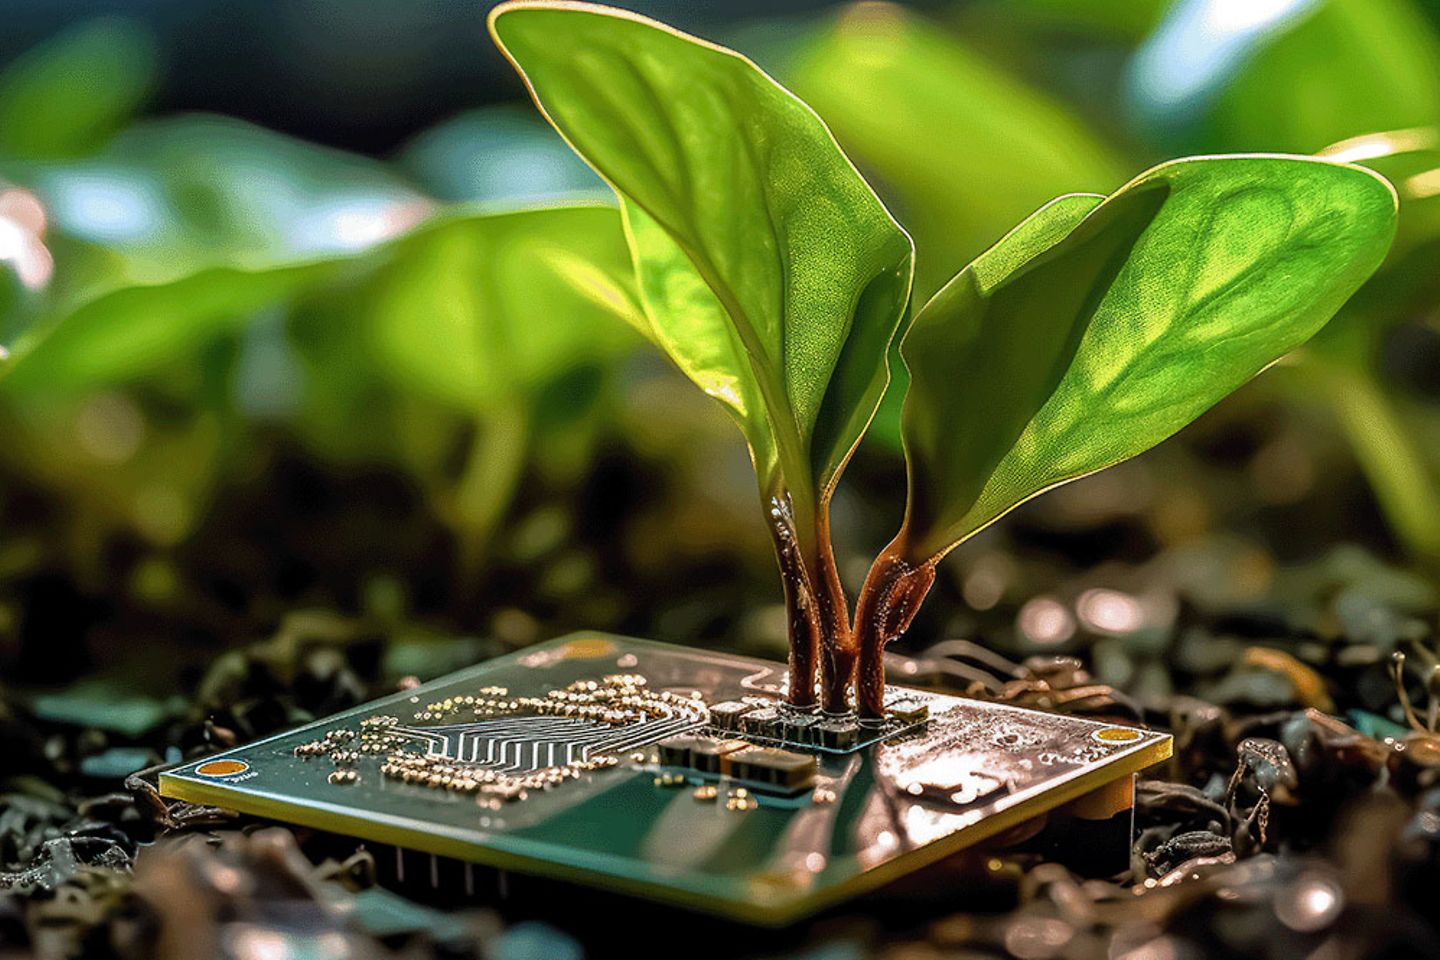 A computer chip illustrates an eco friendly concept of new life